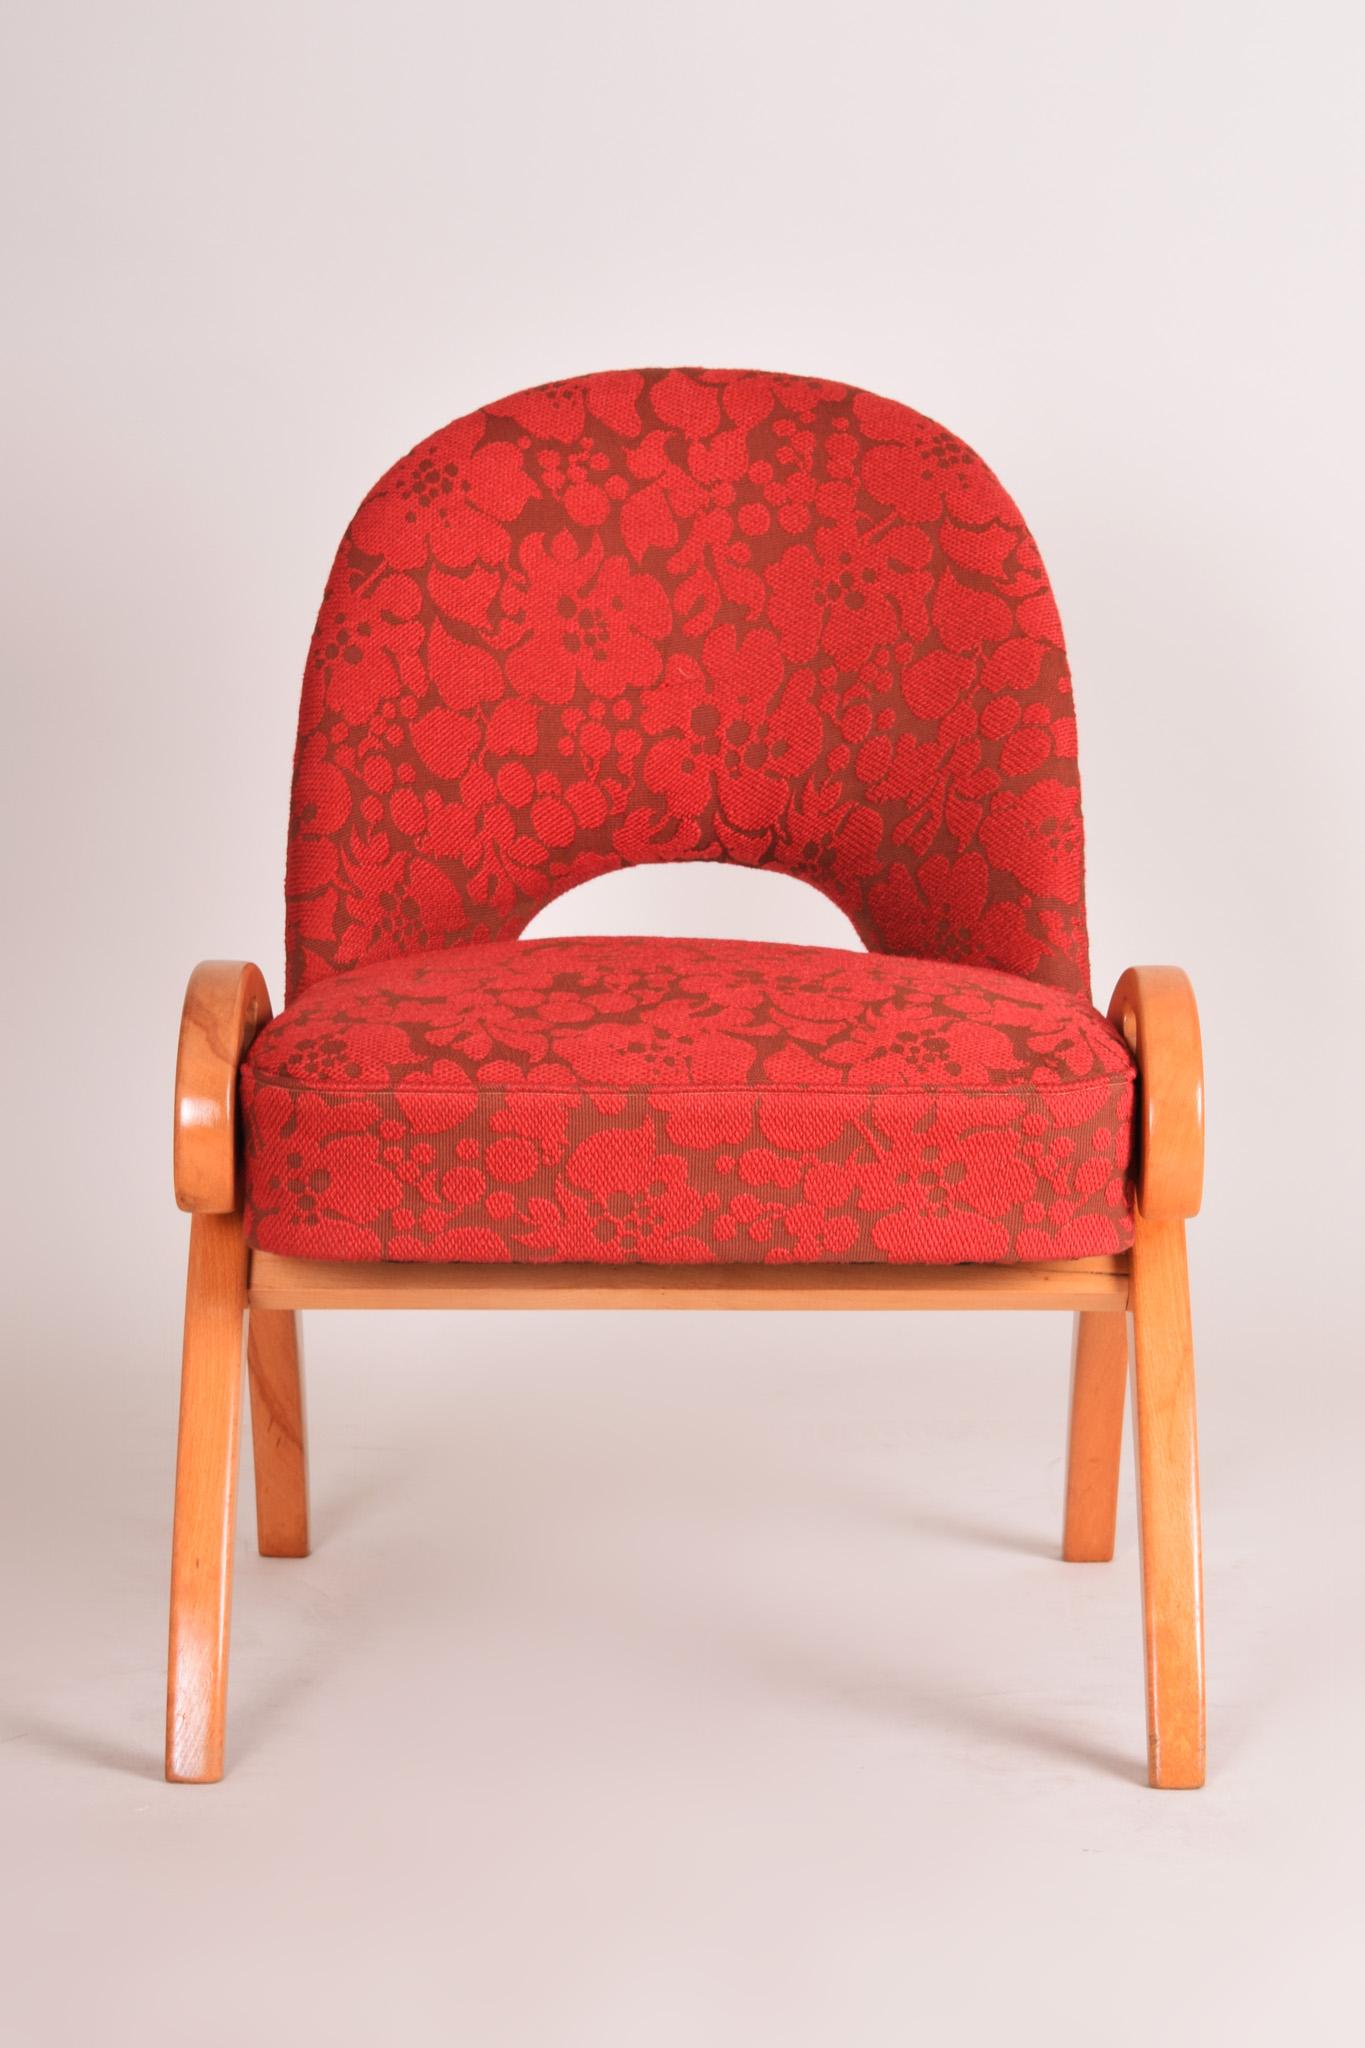 20th Century Red Mid Century Armchair, Made in 1950s Czechia, Beech, Original Condition For Sale